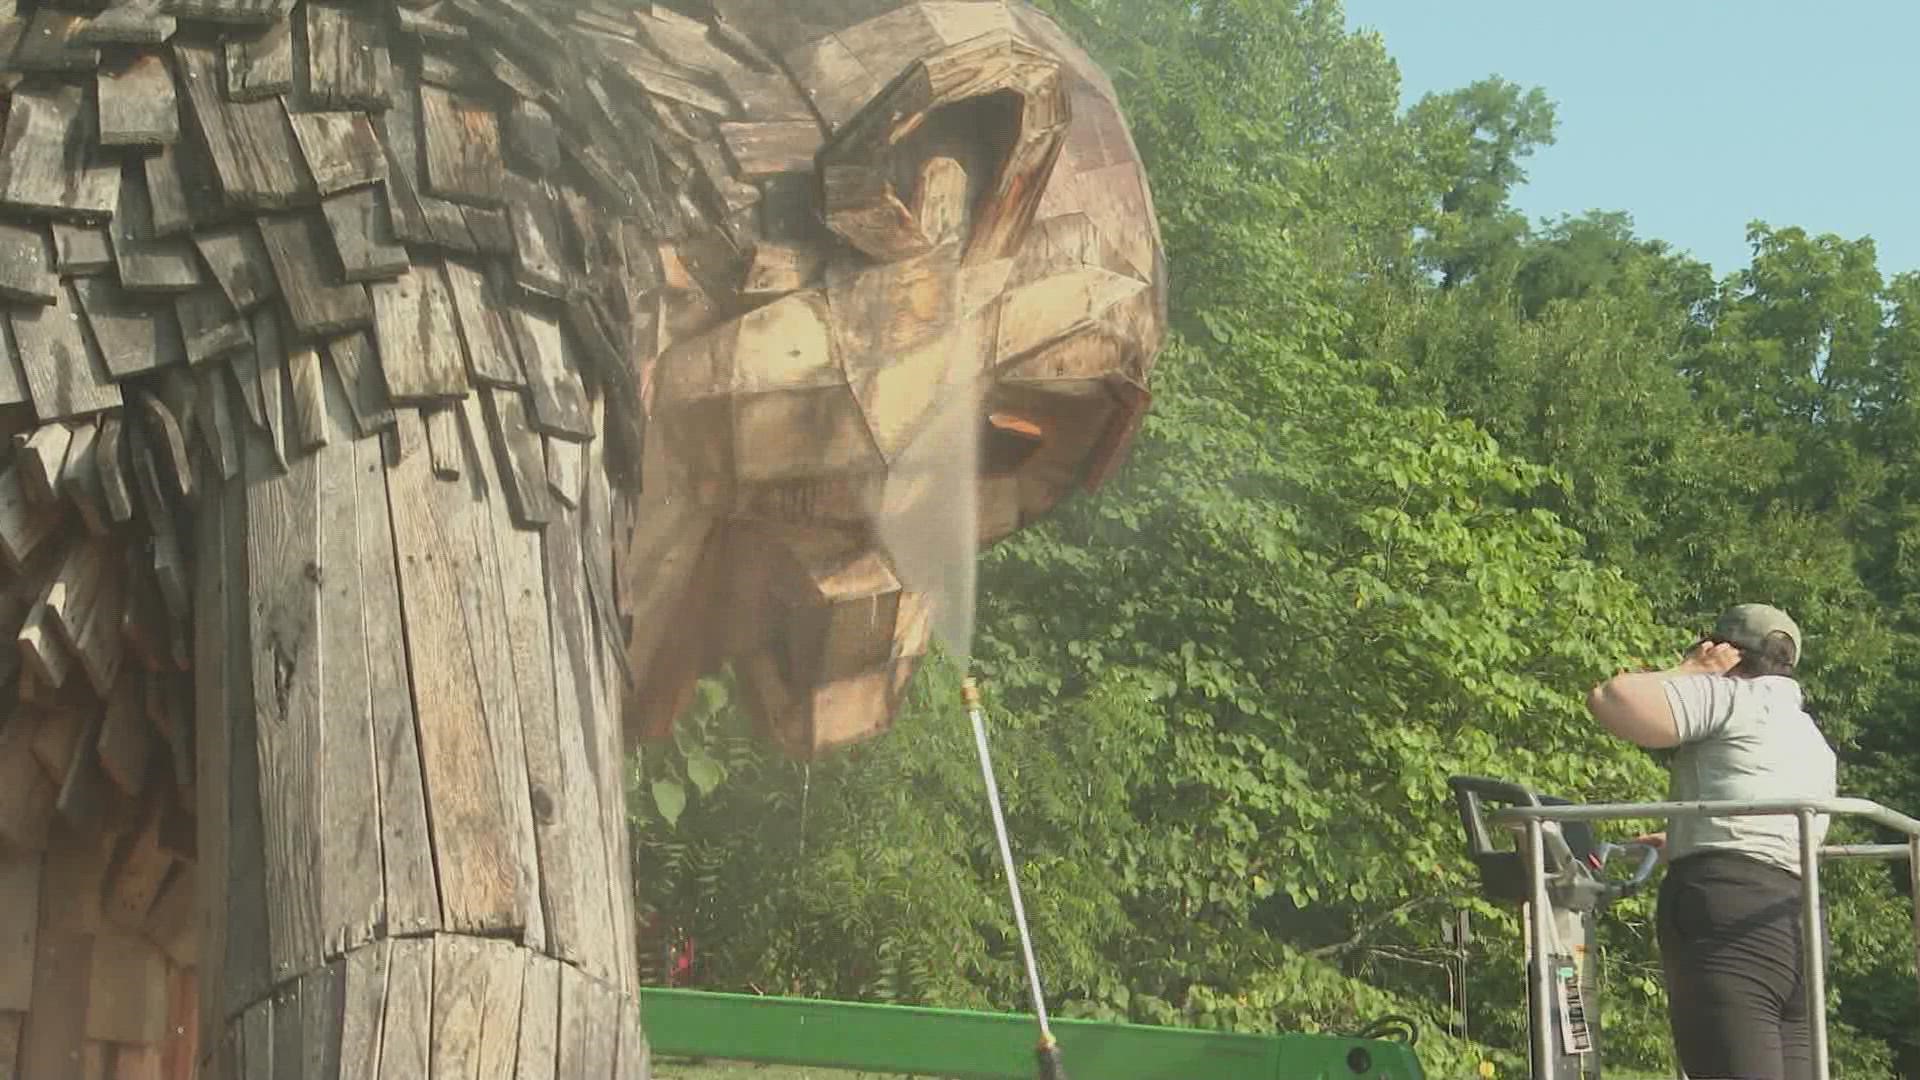 The Bernheim Giants are made of reclaimed wood, so that makes them susceptible to the elements and harsh weather.